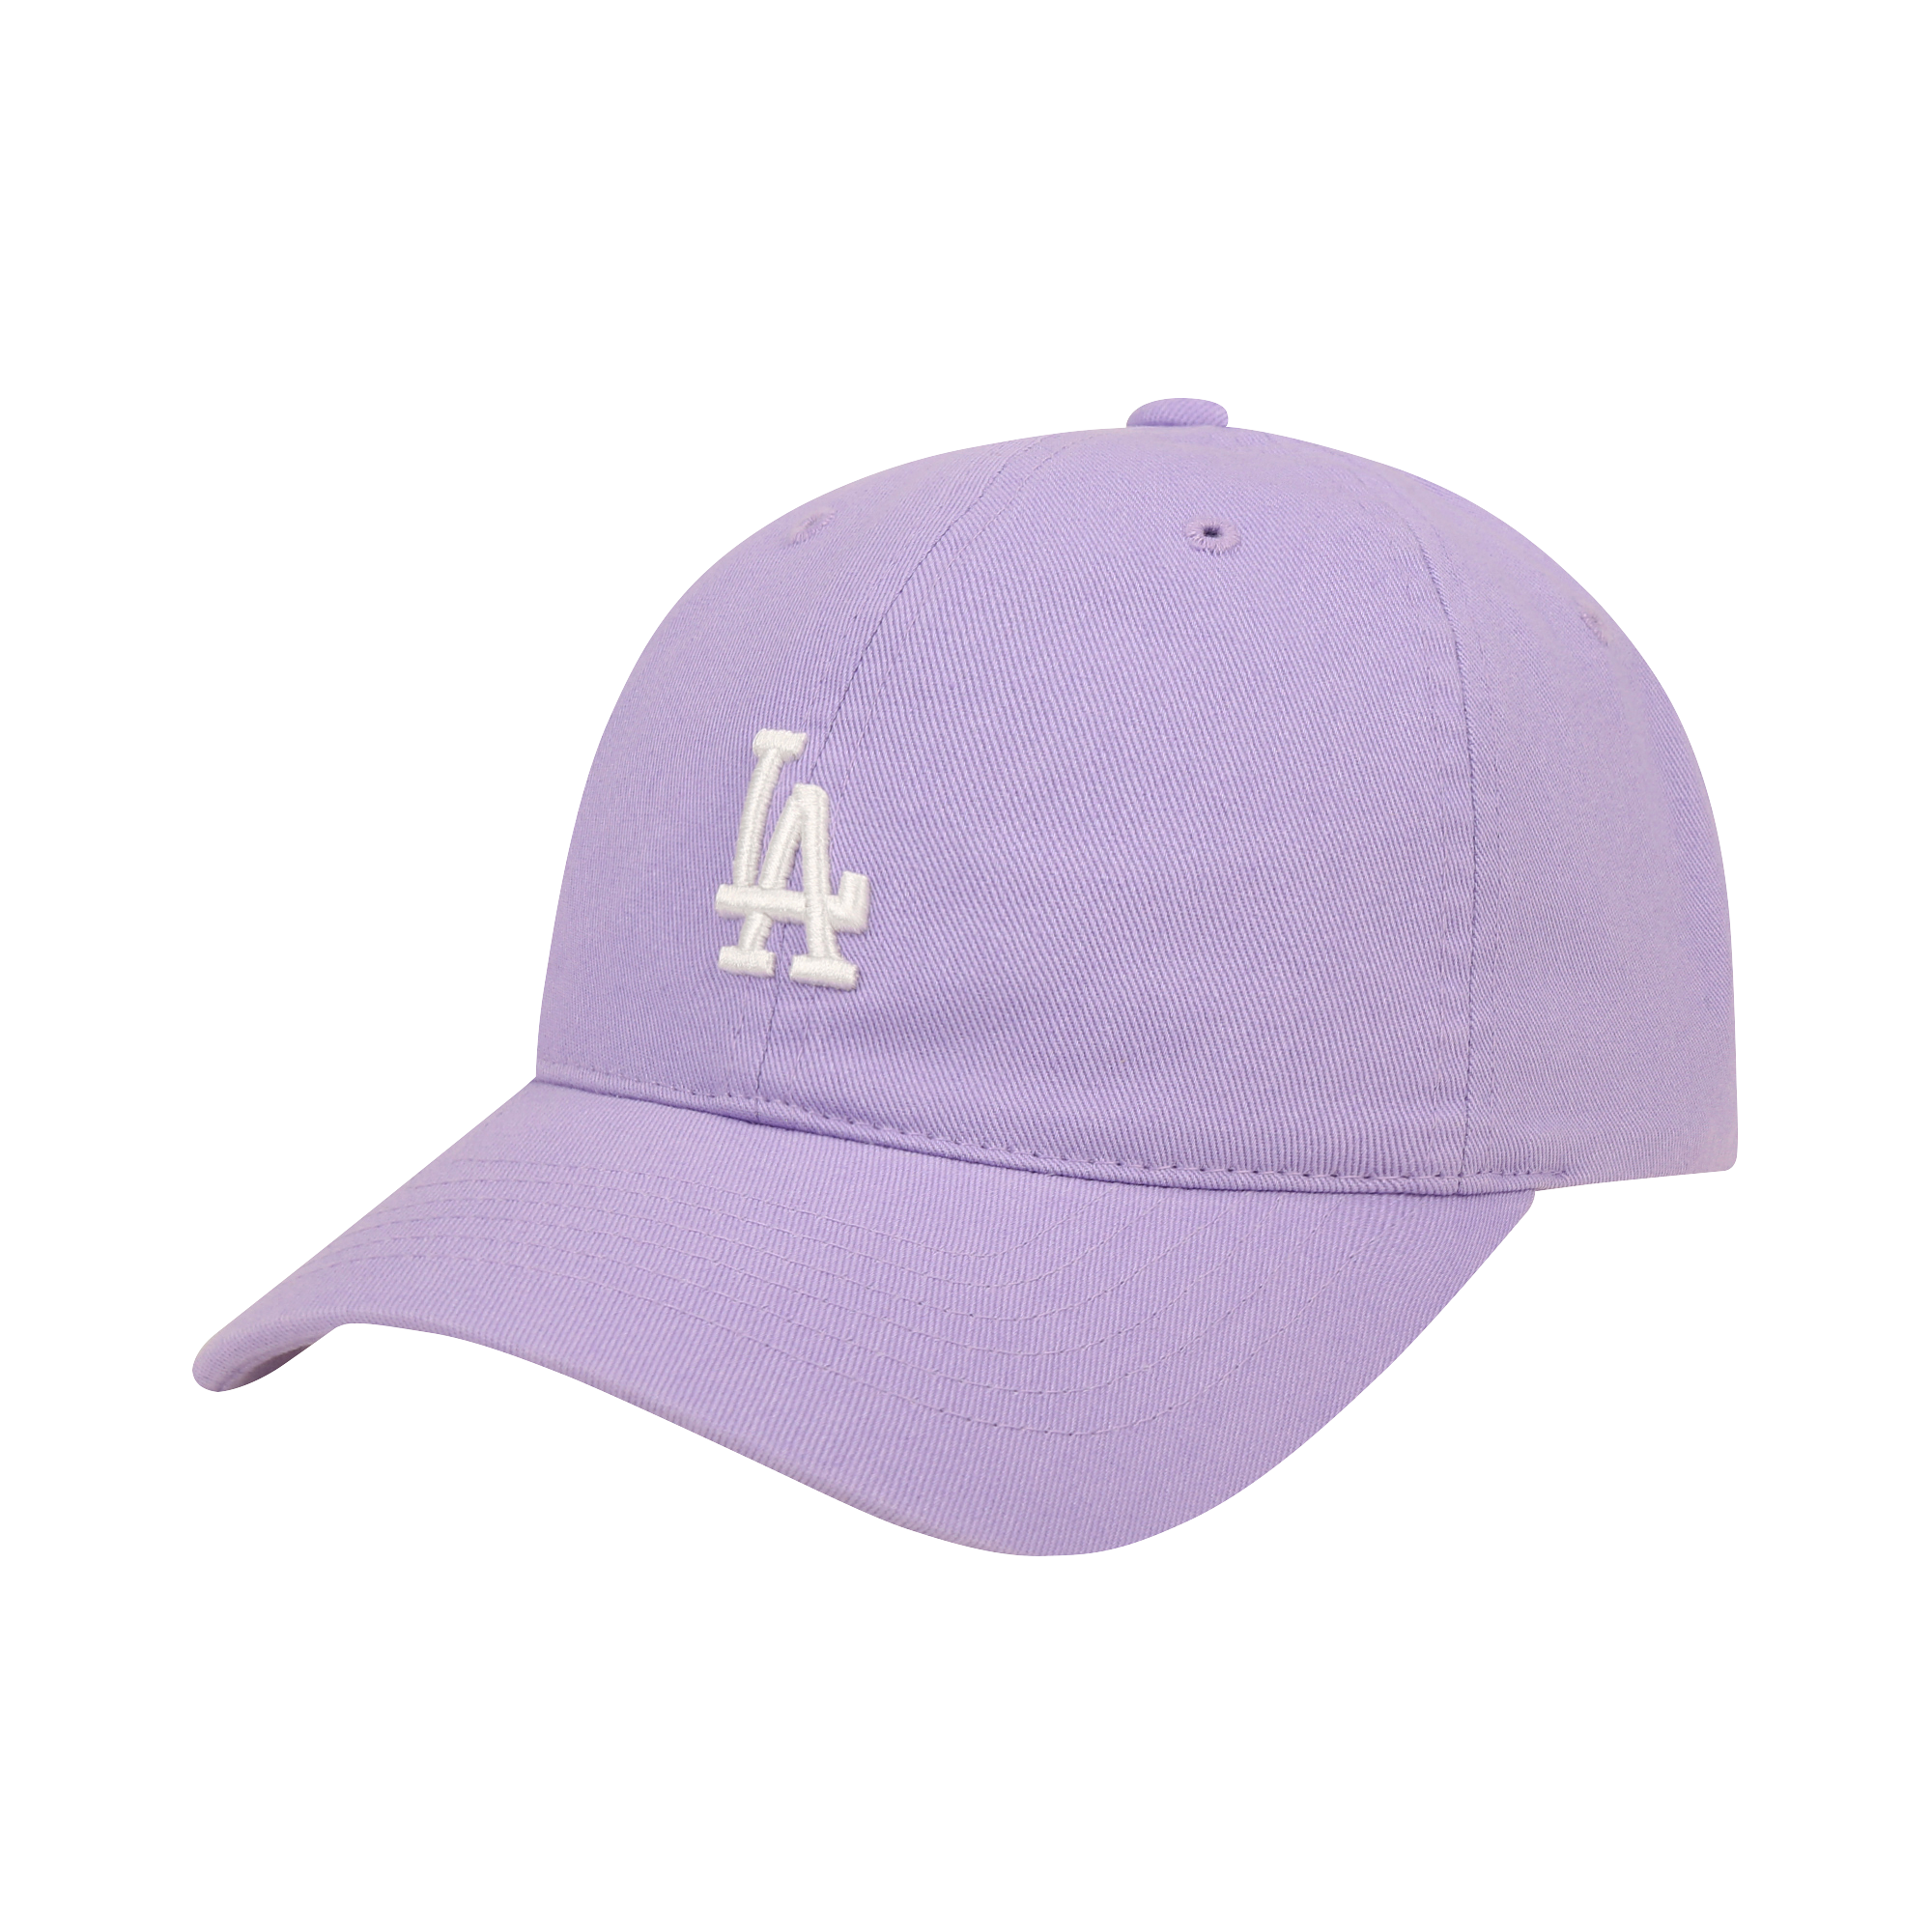 MLB หมวกแก็ป ACCESSORY UNISEX BALL CAP 32CP77111 07V LOS ANGELES DODGERS VIOLET